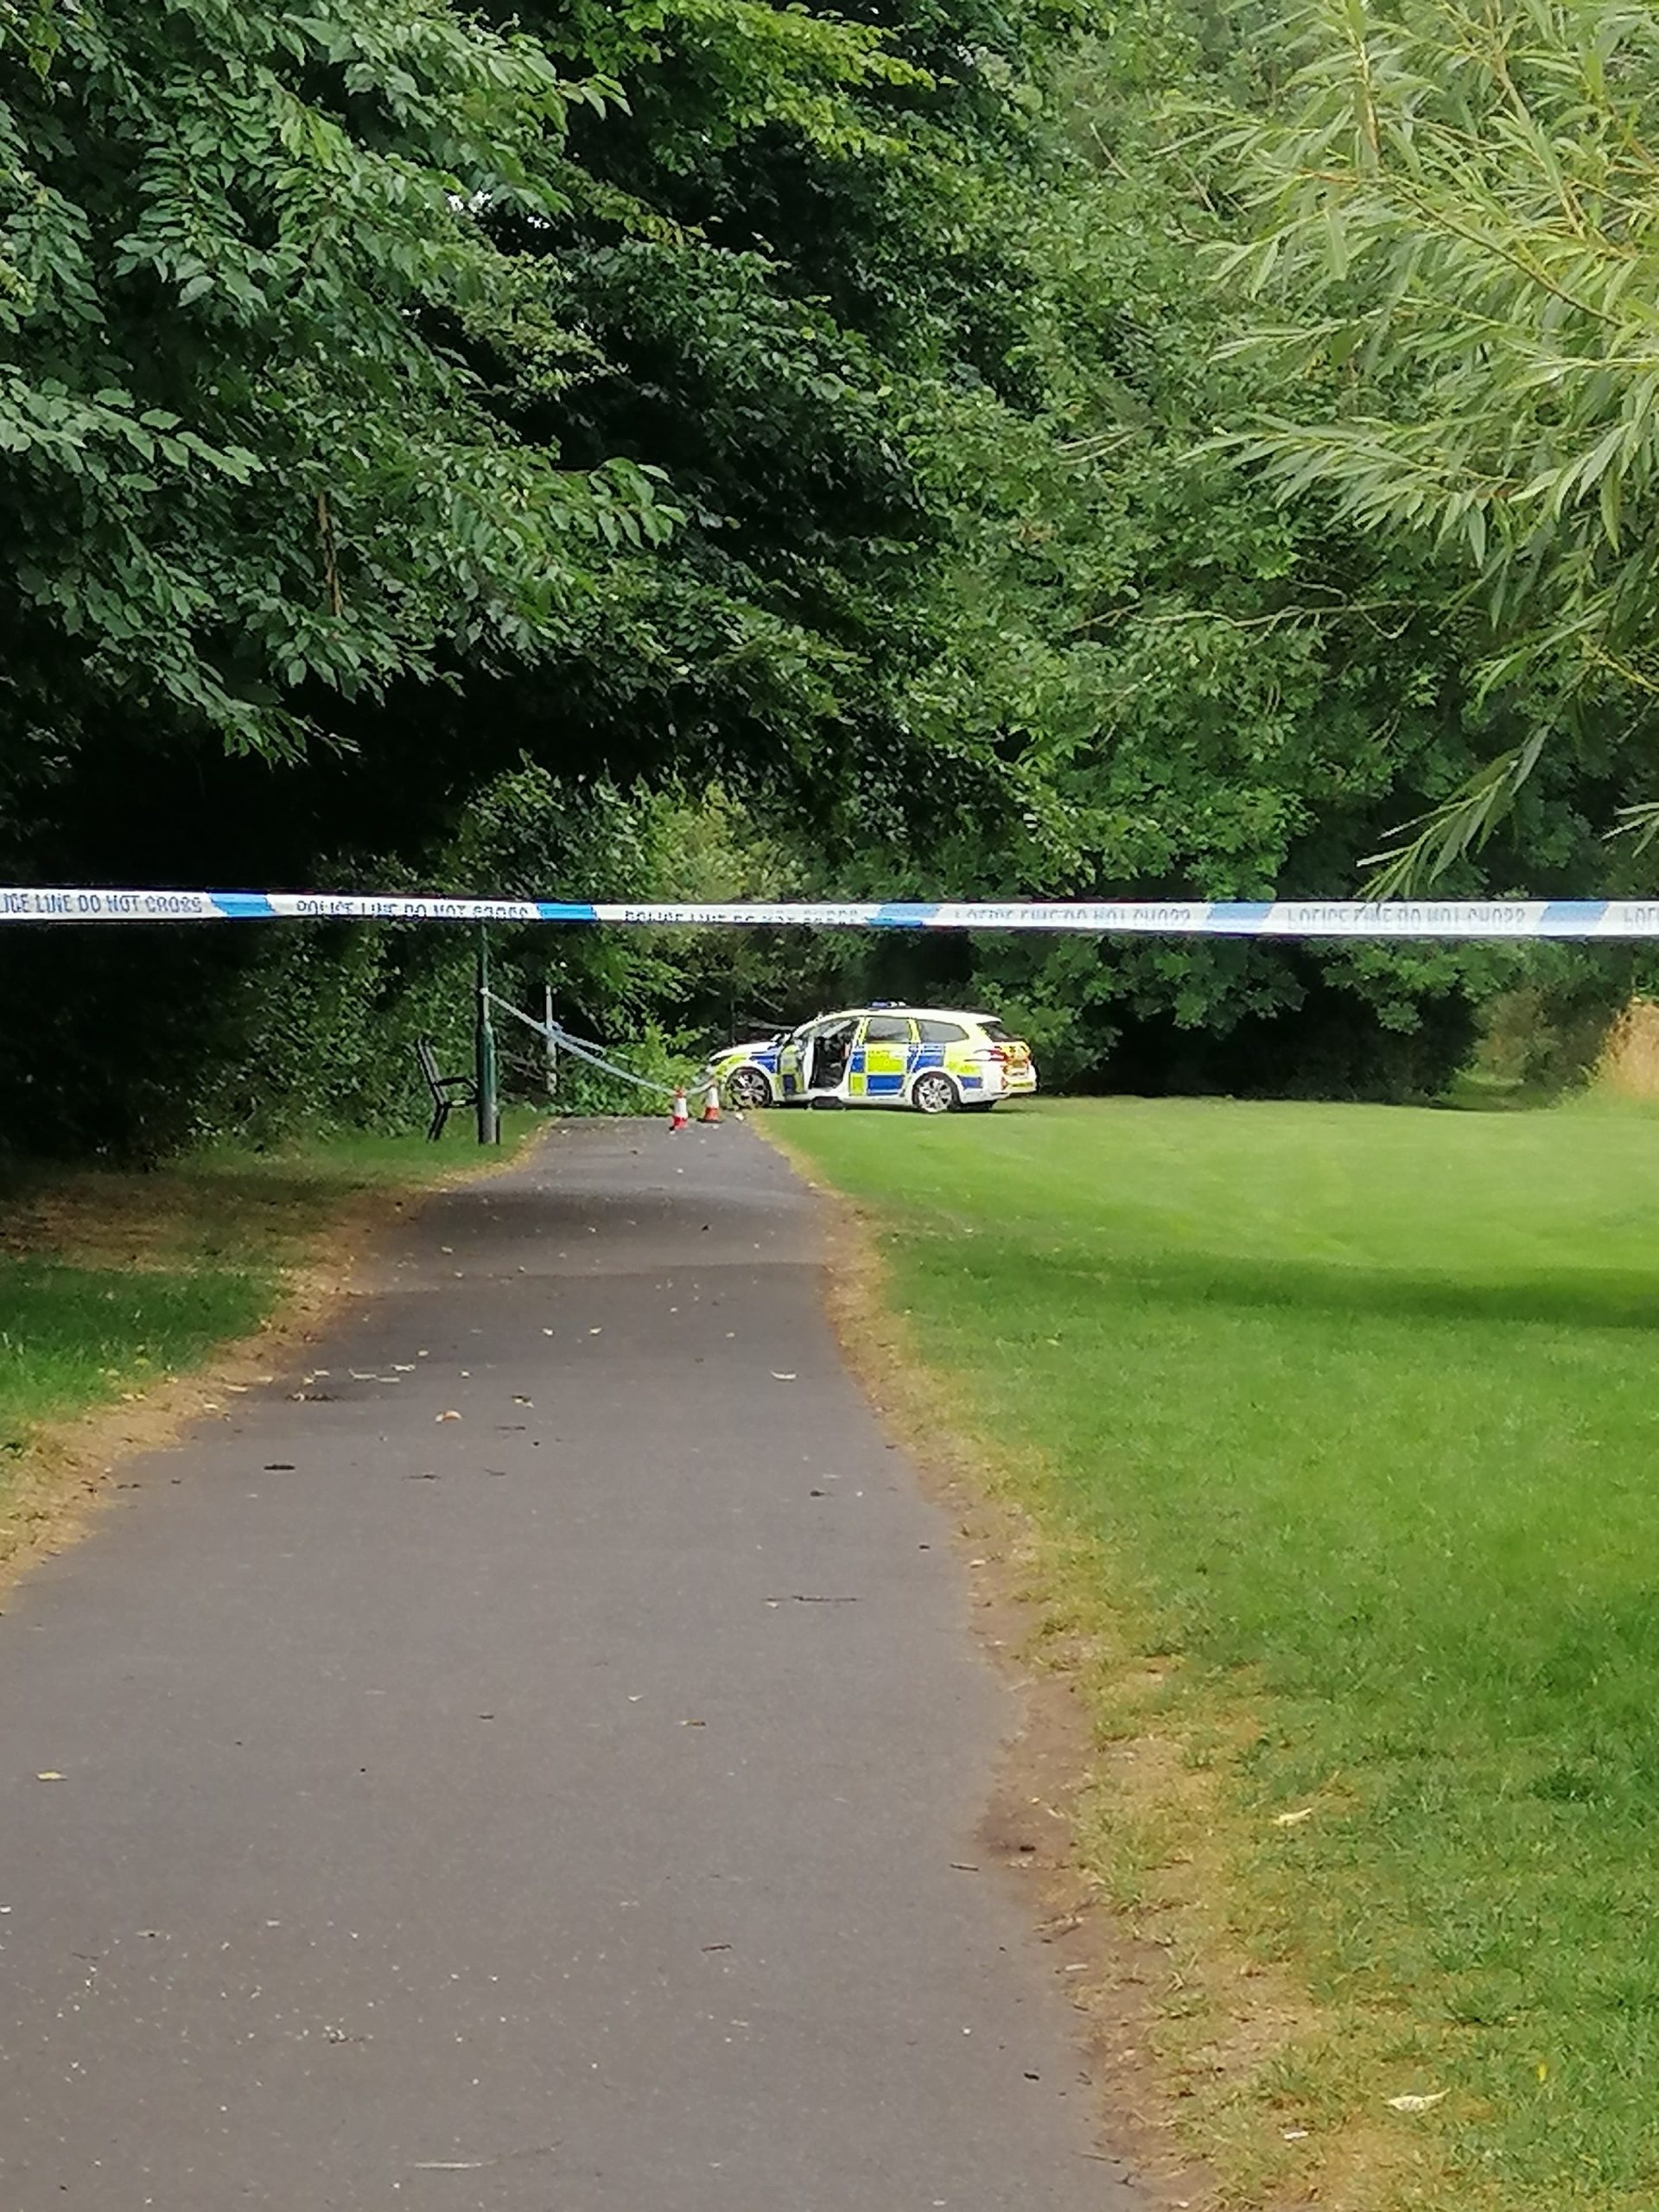 NEWS | Police are continuing to appeal for witnesses following reports that a woman was raped in Hereford